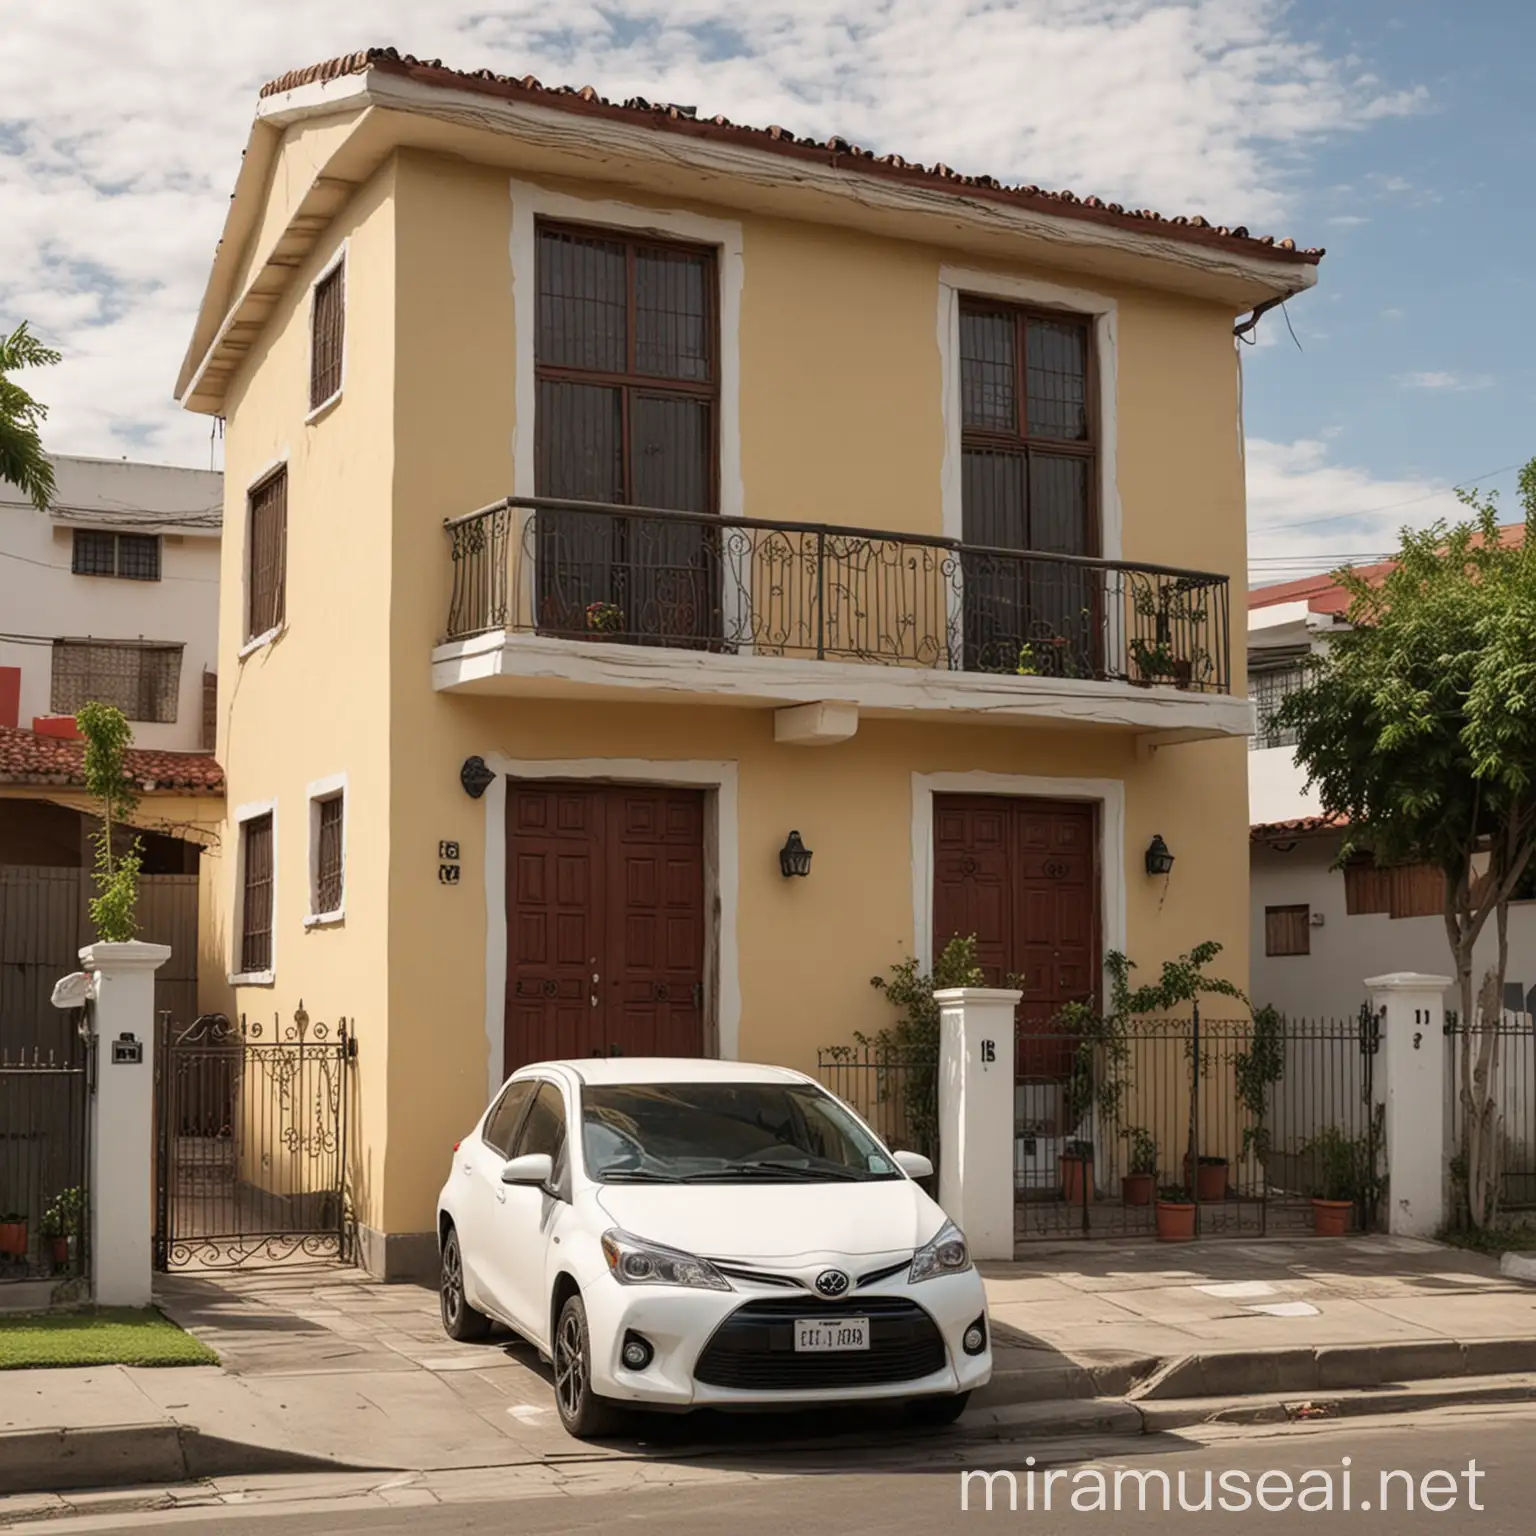 Middle Class Peruvian House with White Toyota Yaris Car